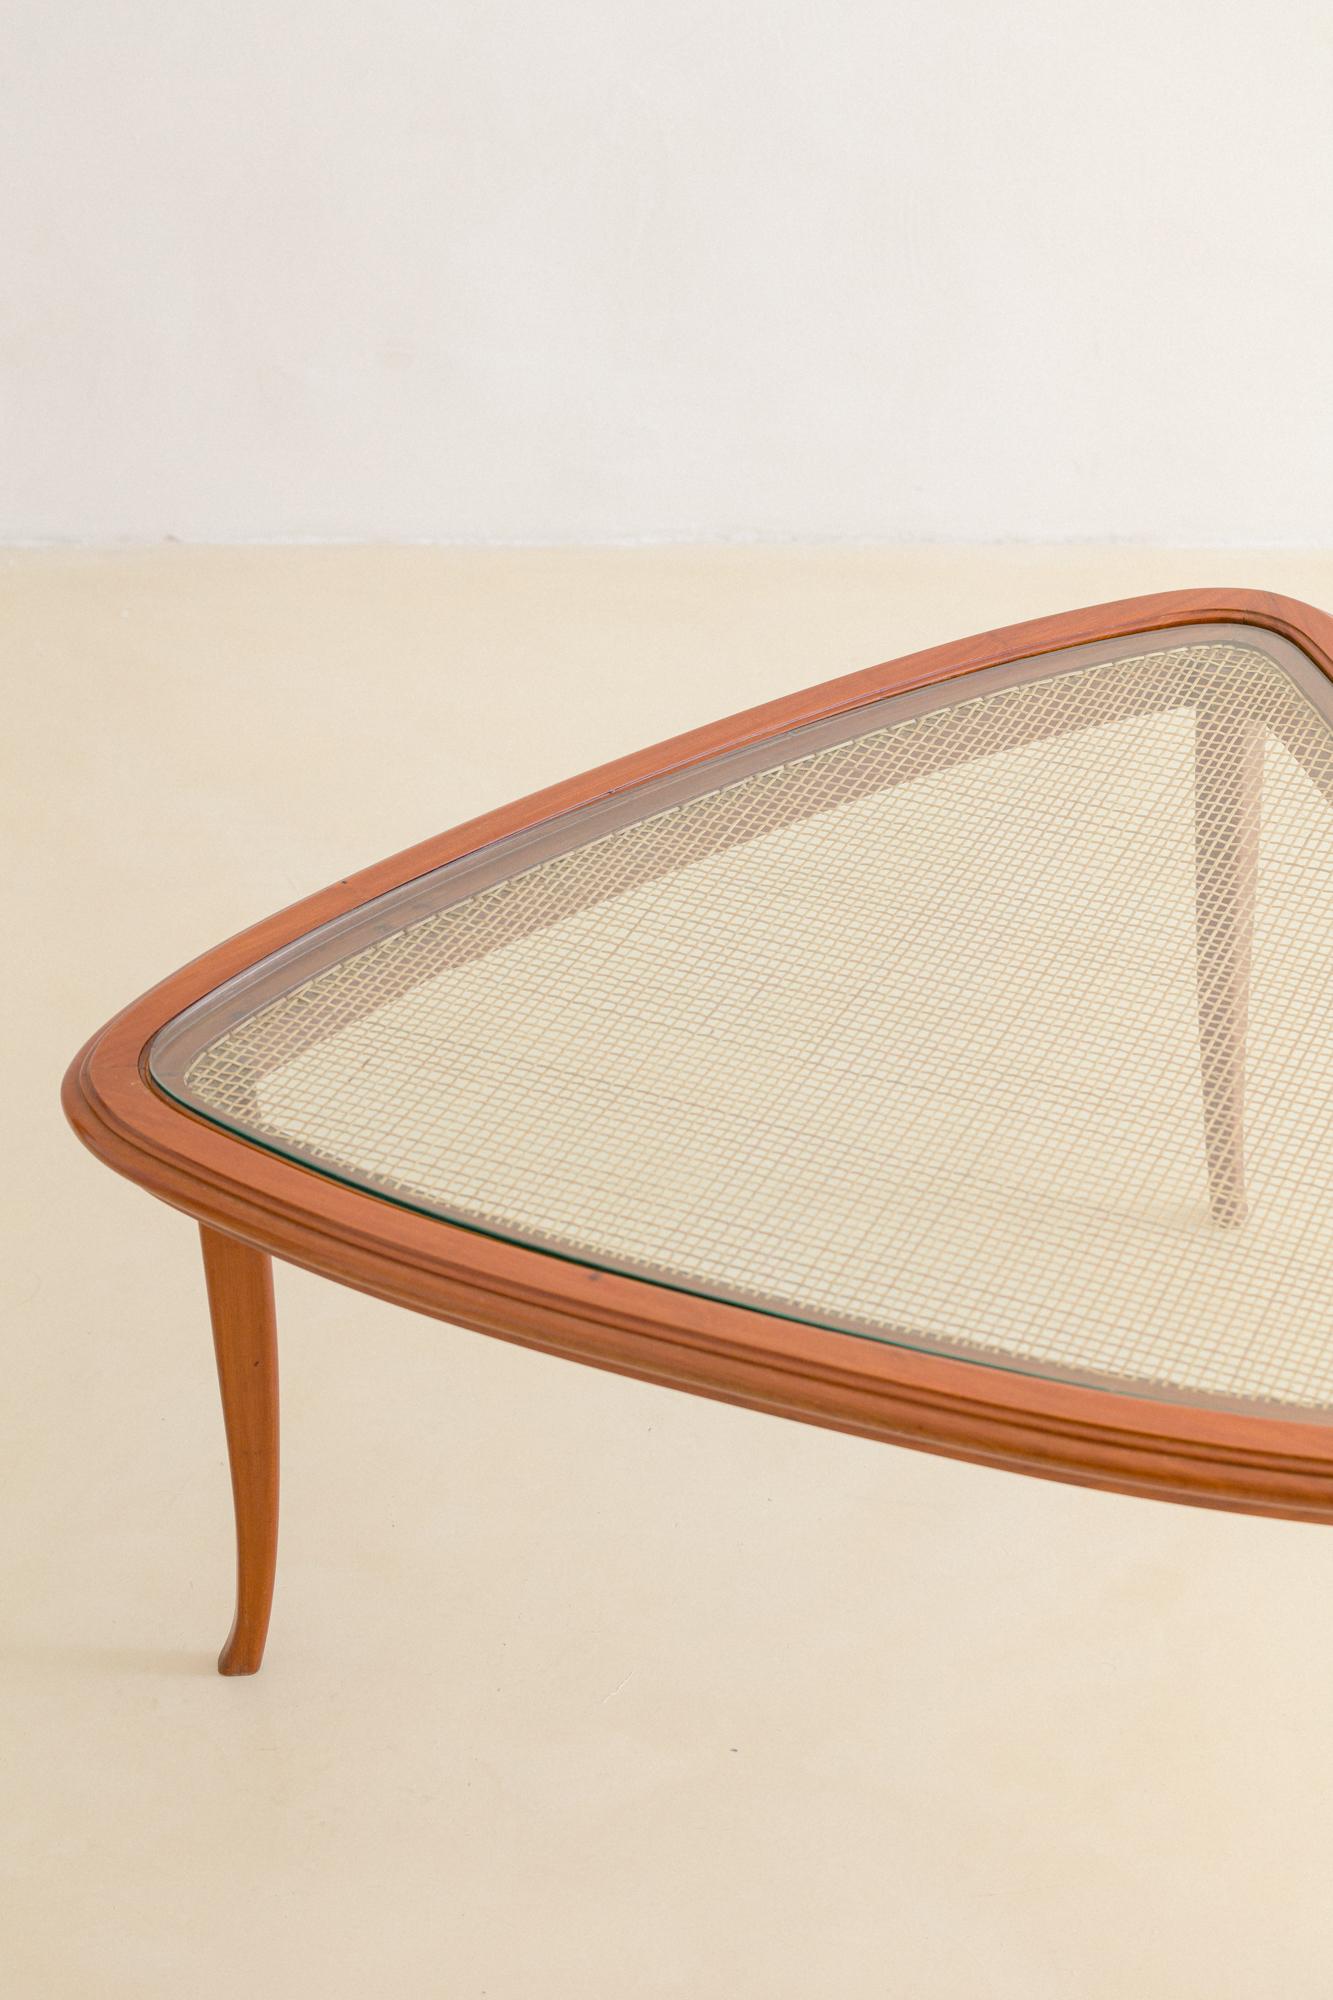 This charming Triangular coffee table was designed in the 1950s. 

The three-leg table is composed of a solid Caviuna structure and has rounded corners. The table's top is made of glass, but its biggest highlight is a weave of natural cane,